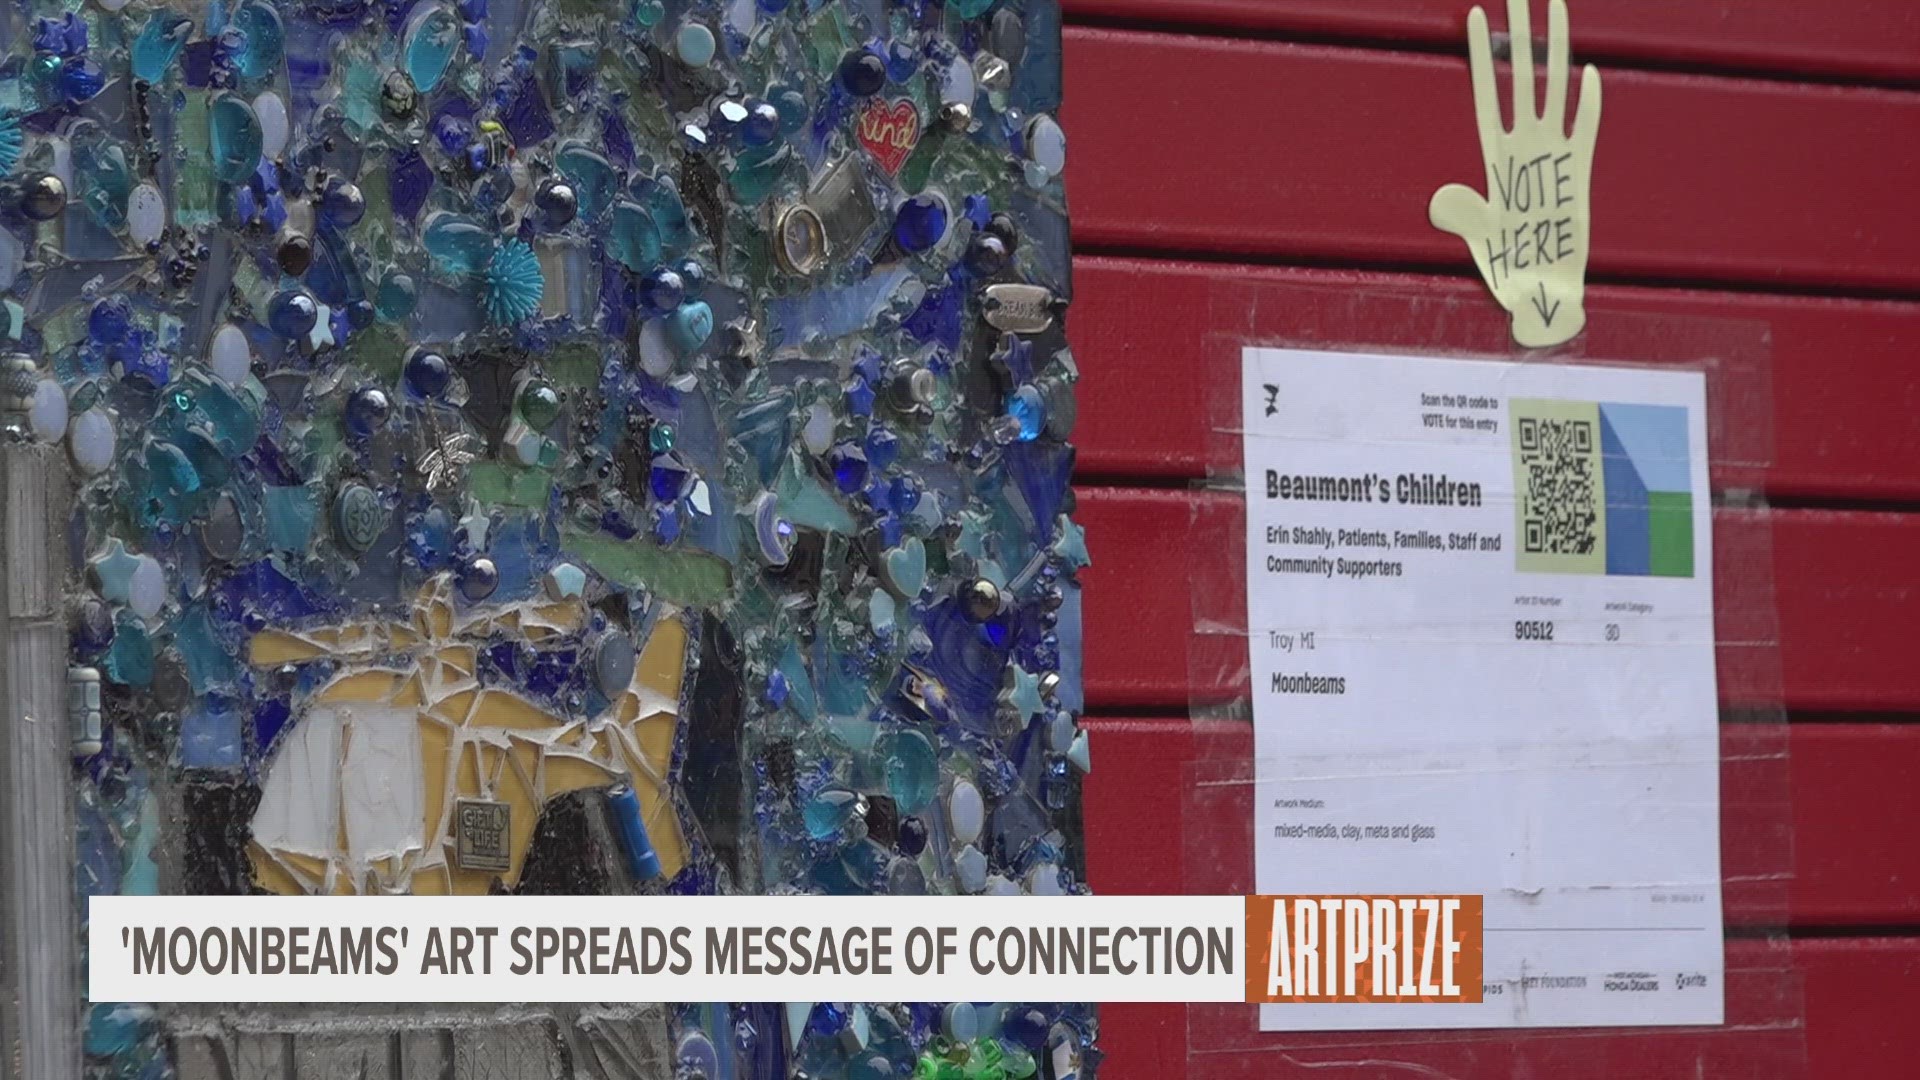 An art therapist at Beaumont Children's Hospital in Royal Oak, Erin Shahly hopes to spread an important message through this mosaic.